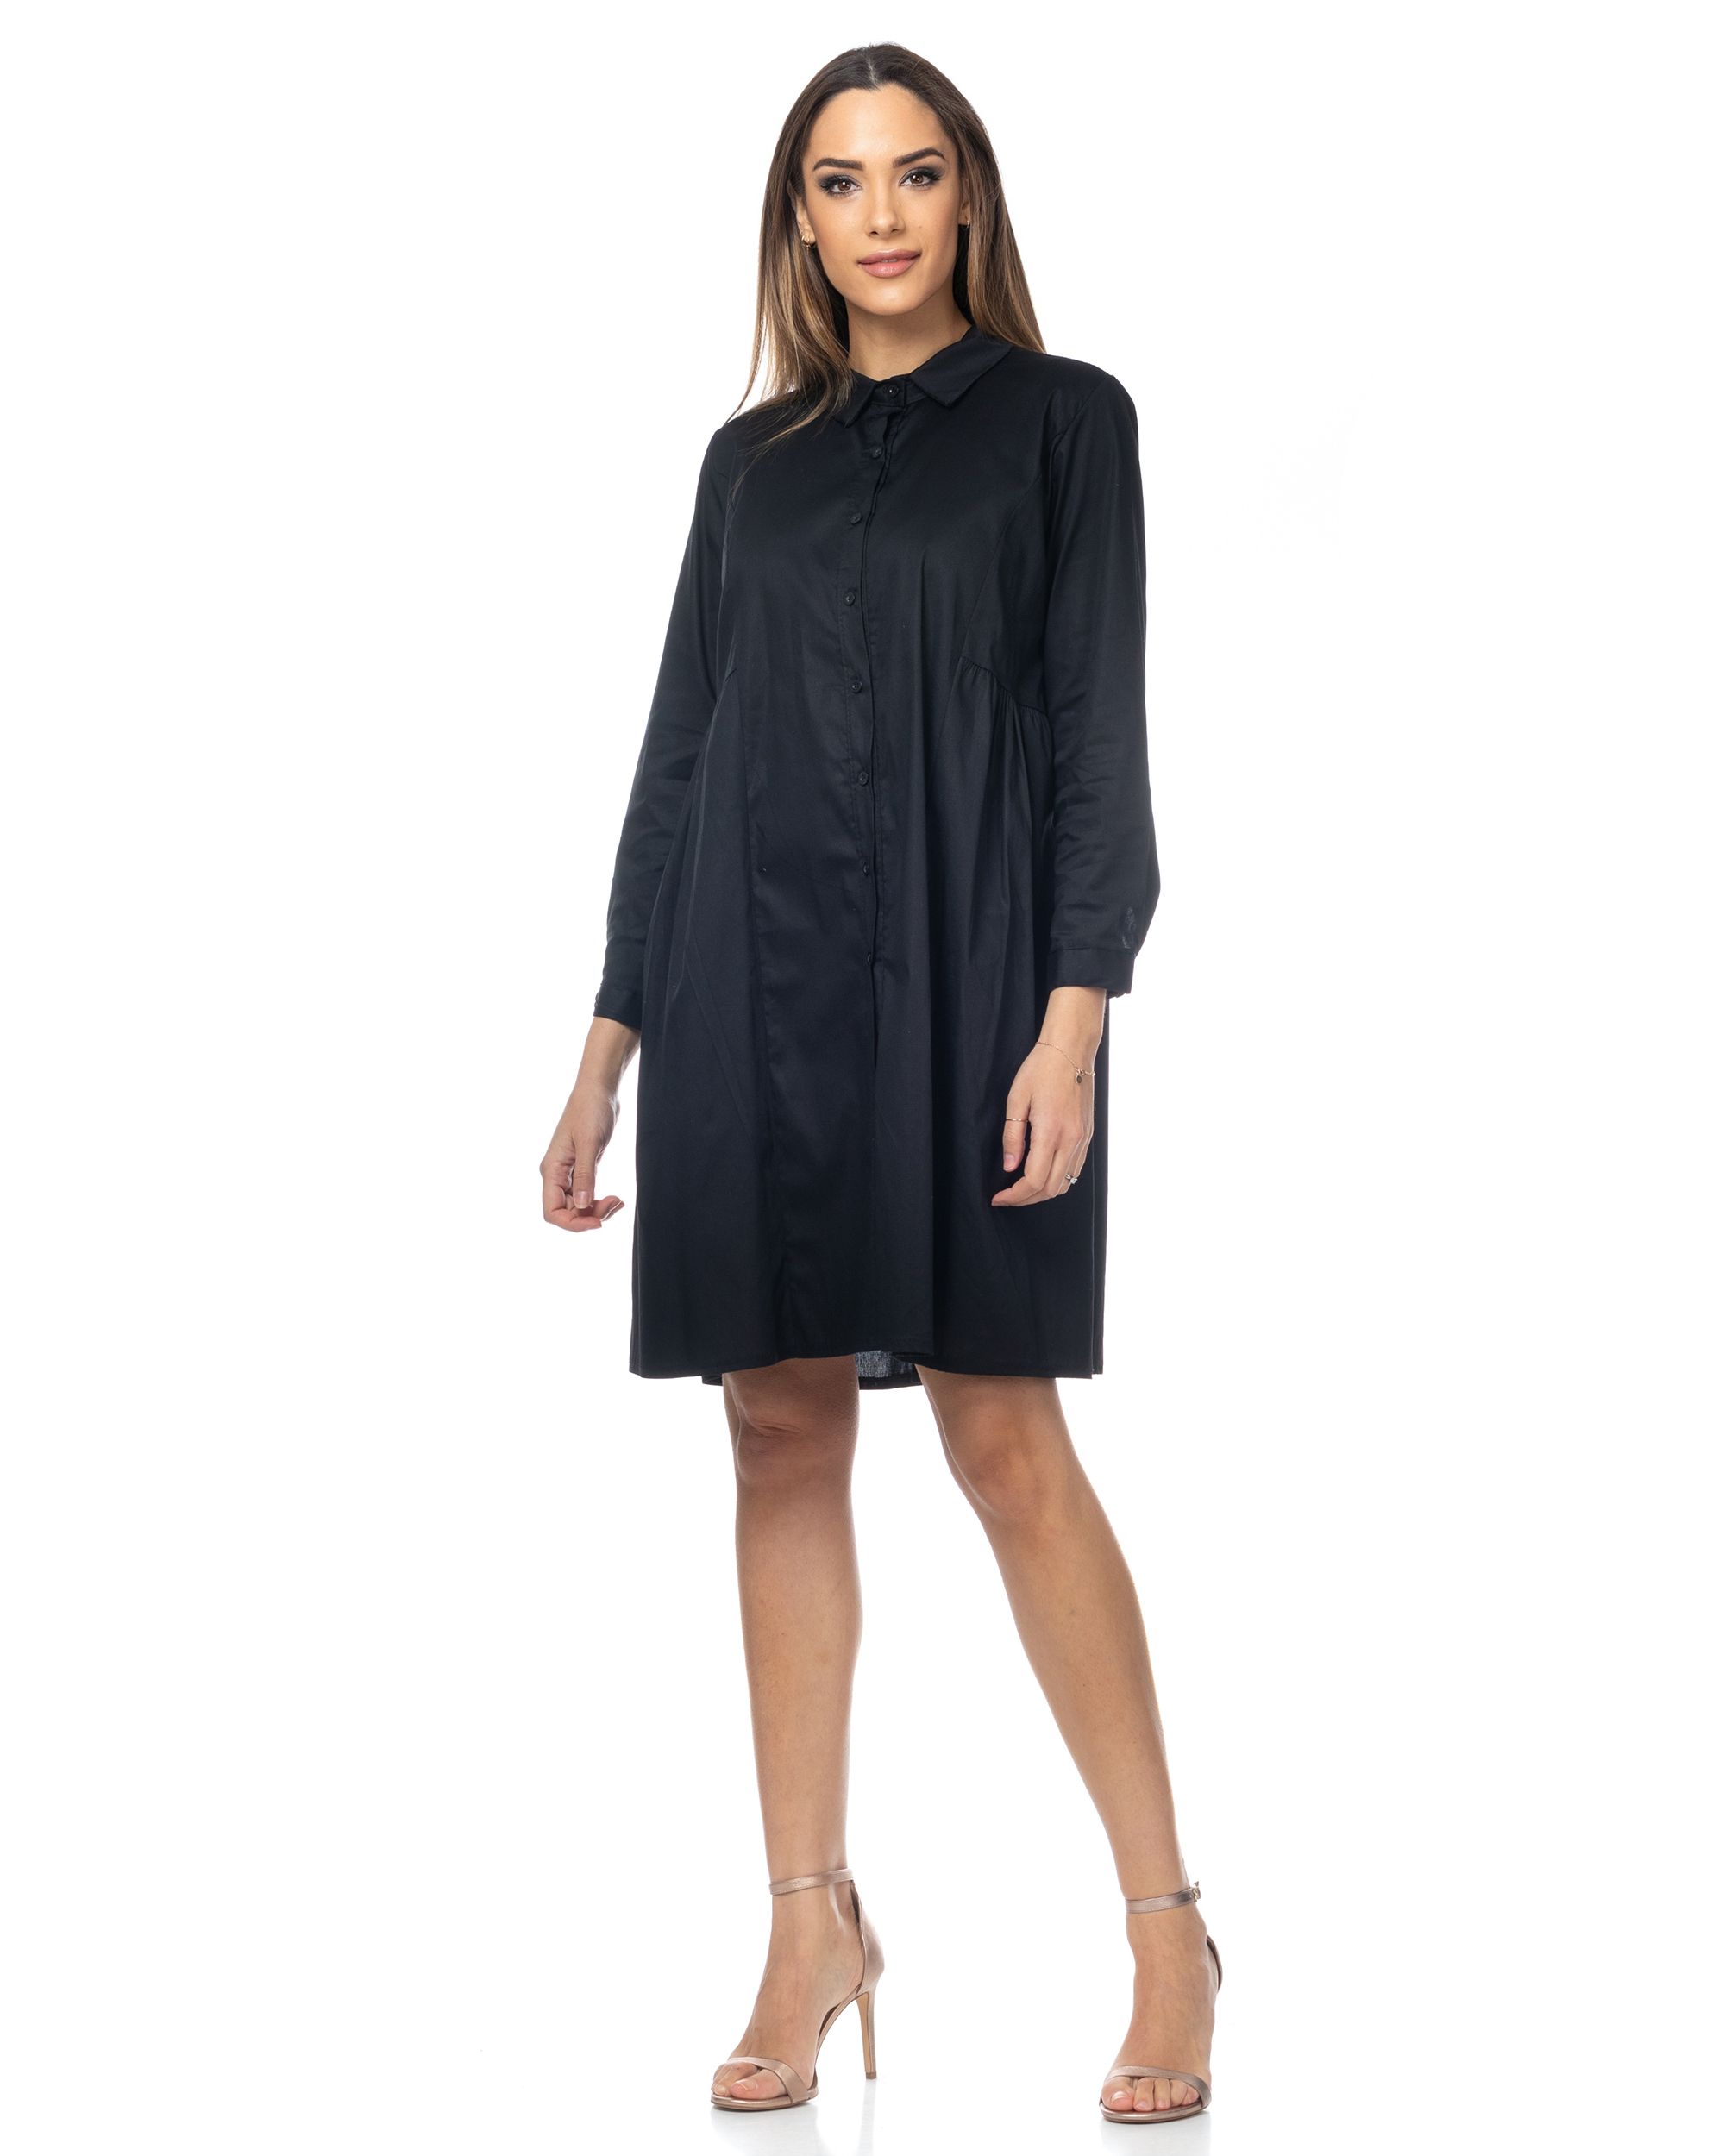 Oversized shirt dress with pleats at the waist